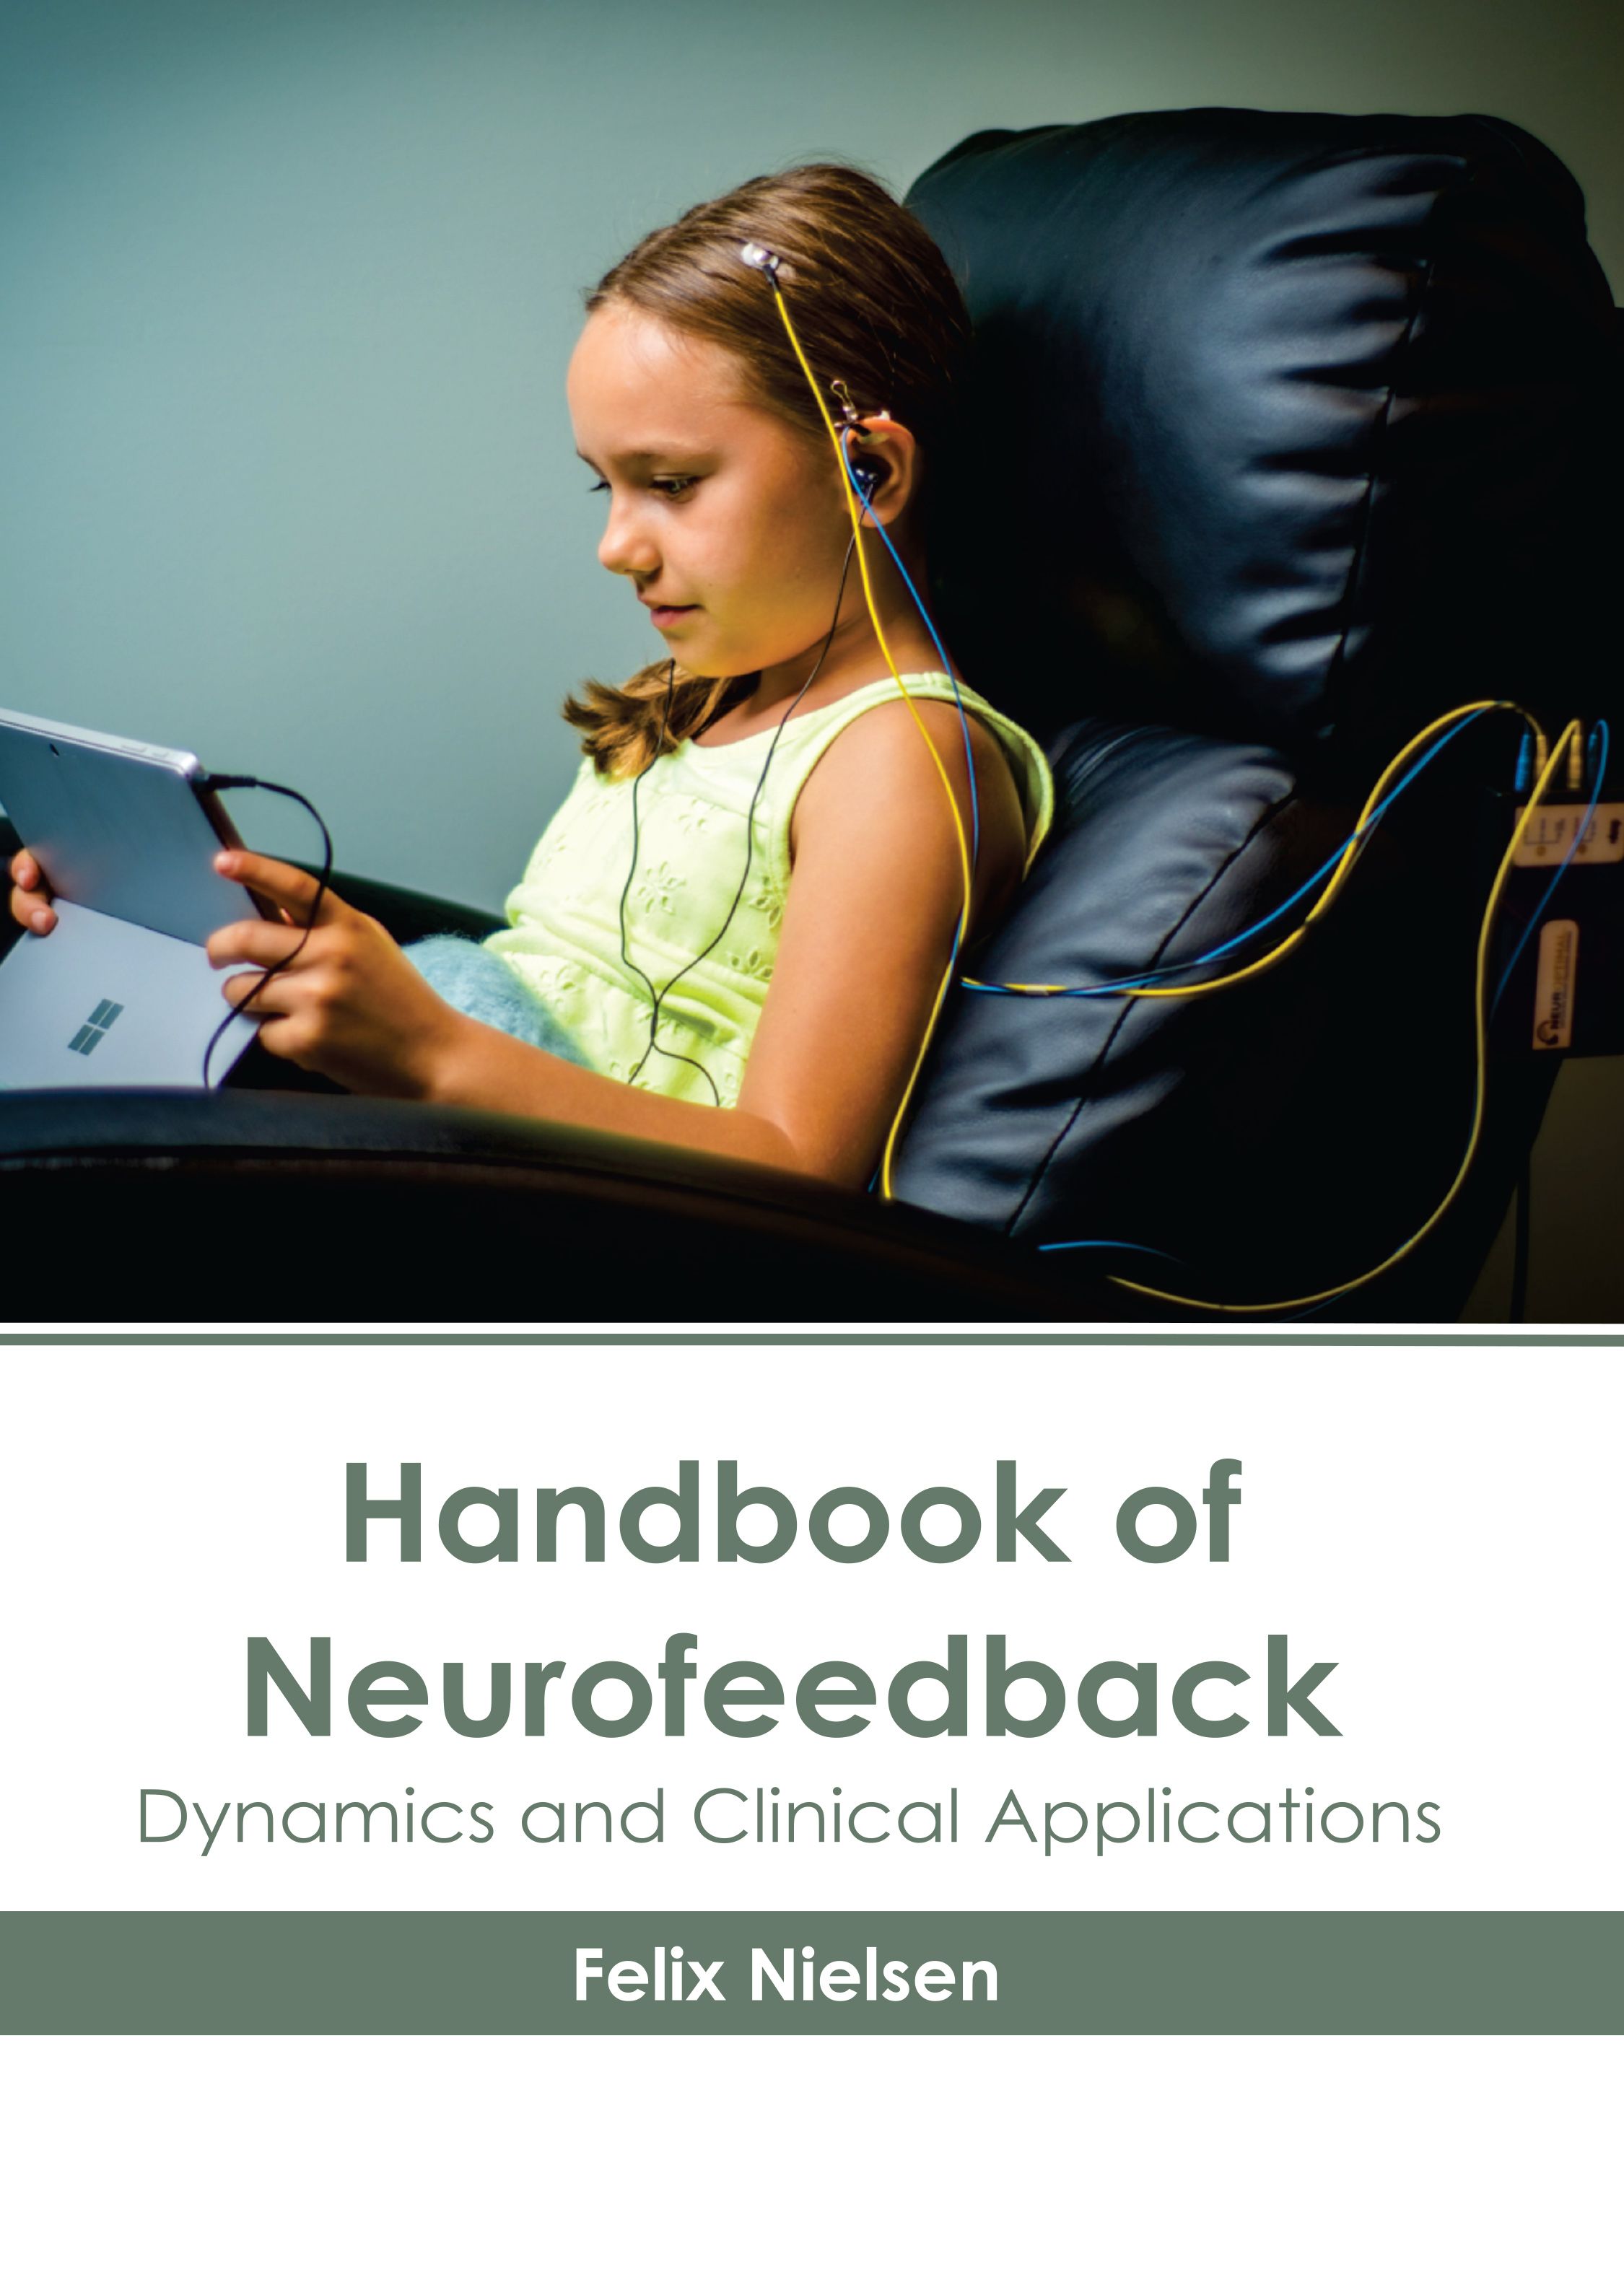 

exclusive-publishers/american-medical-publishers/handbook-of-neurofeedback-dynamics-and-clinical-applications-9798887401515